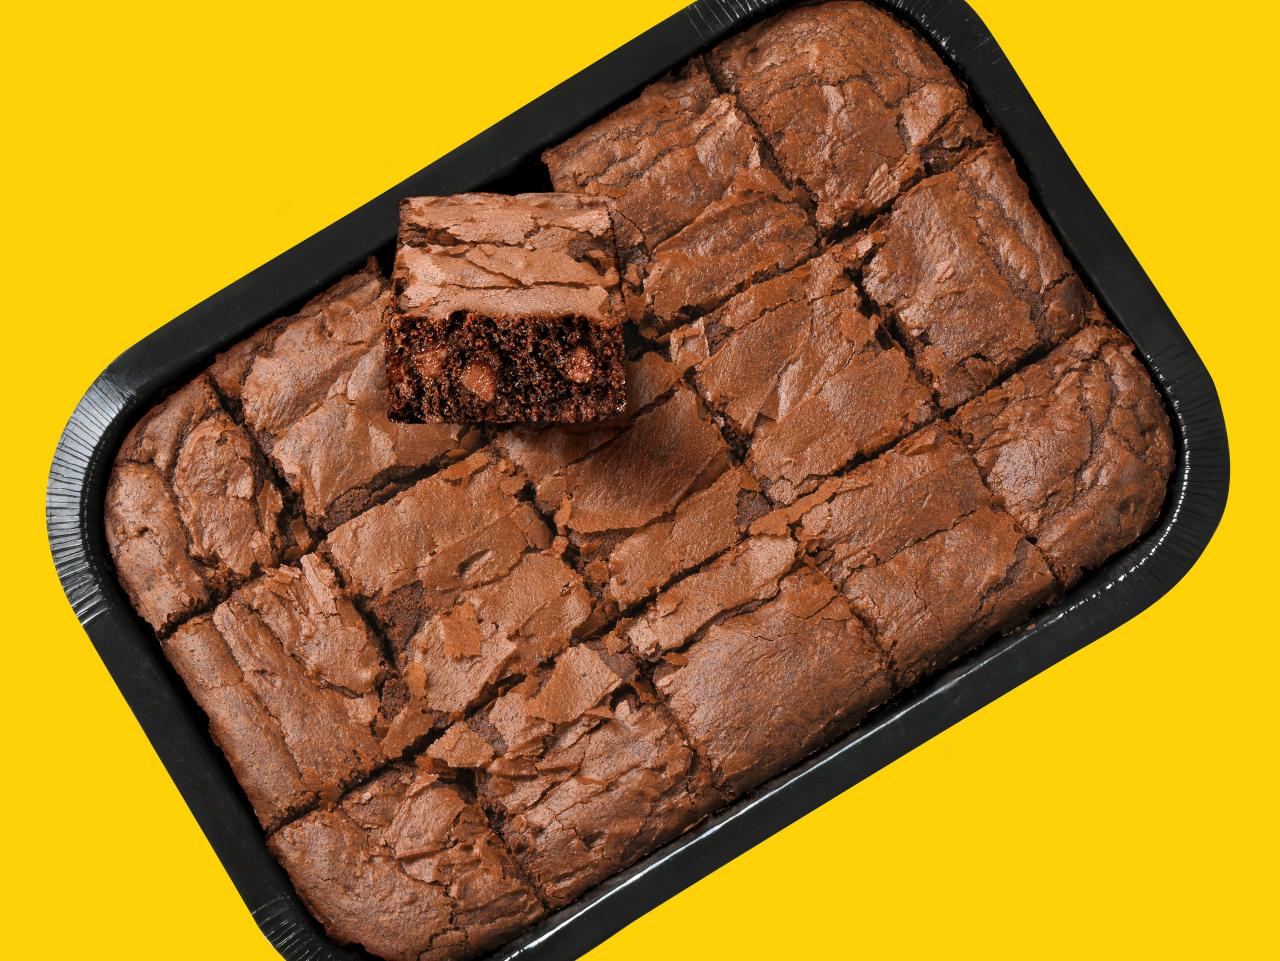 https://food.fnr.sndimg.com/content/dam/images/food/fullset/2022/01/18/NTH%20Ready-to-Bake%20Brownies_Yellow%20Background_edited_s4x3.jpg.rend.hgtvcom.1280.960.suffix/1642547022303.jpeg